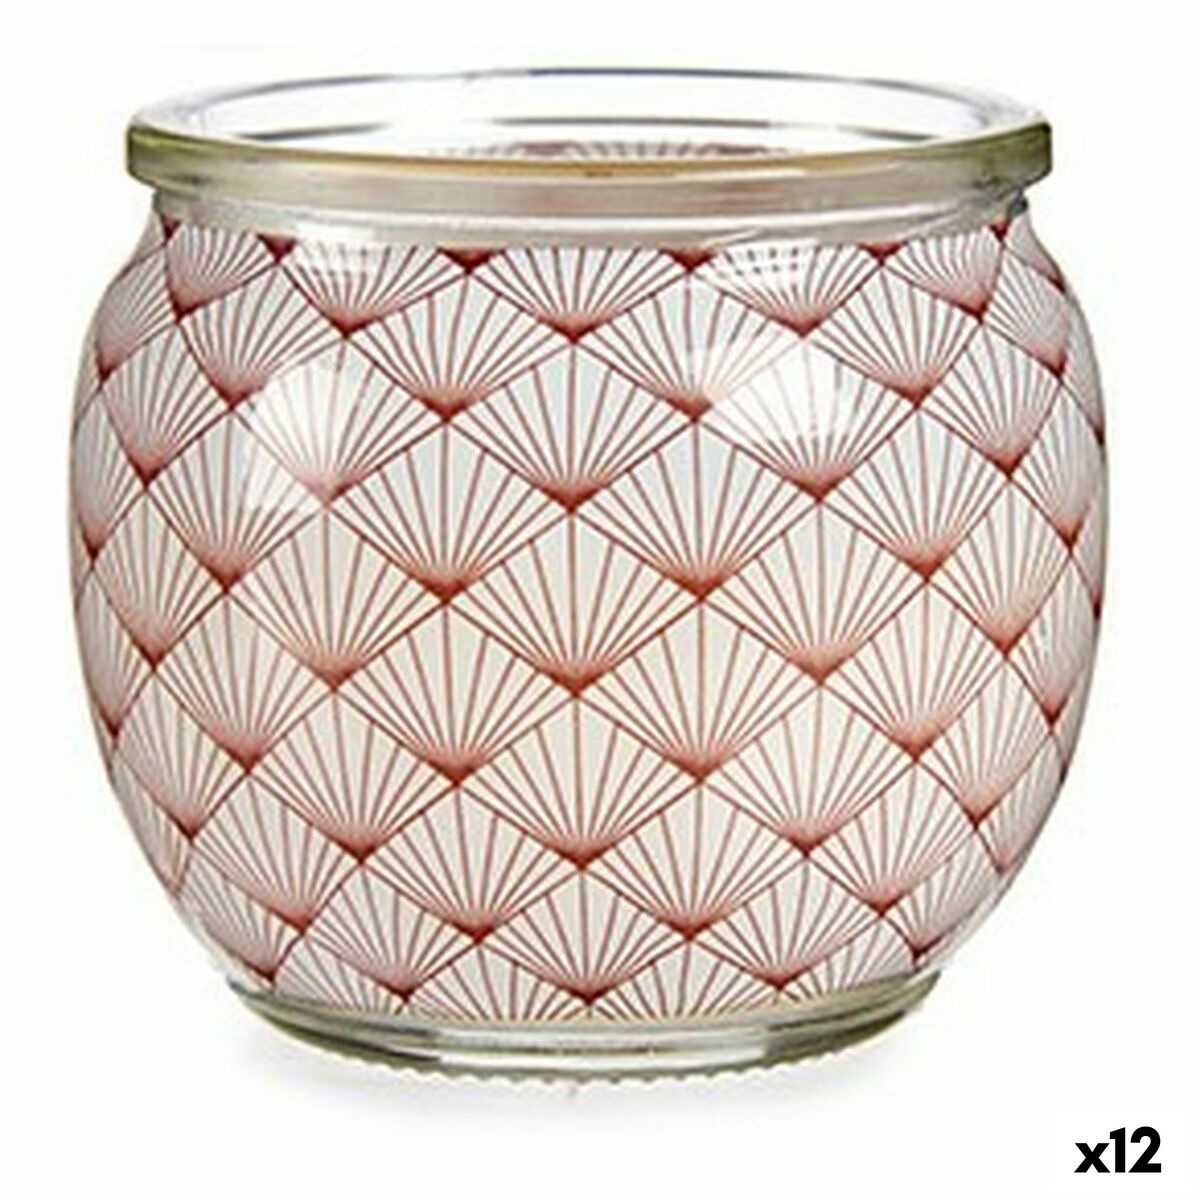 Scented candle Coconut Cream Glass Wax (7.5 x 6.3 x 7.5 cm) (12 parts)